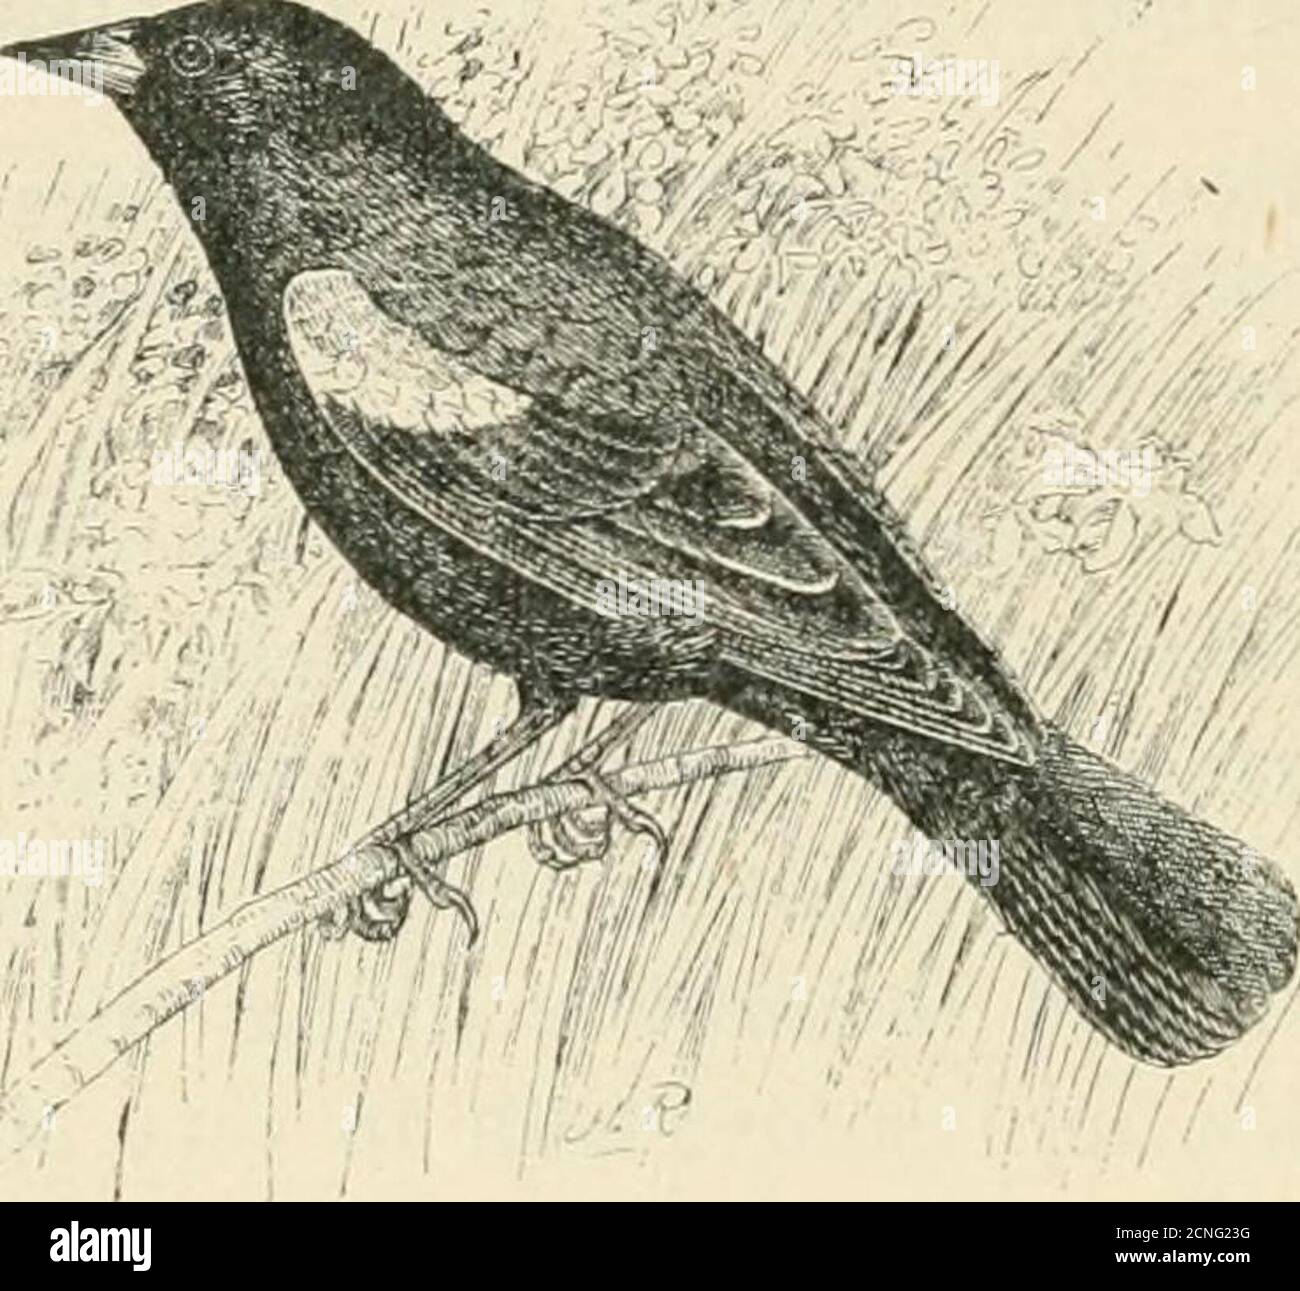 . Handbook of birds of the western United States, including the great plains, great basin, Pacific slope, and lower Rio Grande valley . oint; wings pointed, tail even or rounded;claws small, lateral ones scarcely reaching to base of middle one ; sexesdifferent in size. KEY TO ADULT MALES. 1. Wing with middle coverts black at tips . . californicus, p. 291.r. Wing with middle coverts huffy, brownish, or white at tips.2. Smaller. 8. Females lighter, bnffy tints prevailing on upper parts. * Southern Arizona and New Mexico sonorieiisis, p. 290. o. Females darker, huffy tints not prevailing on upper Stock Photo